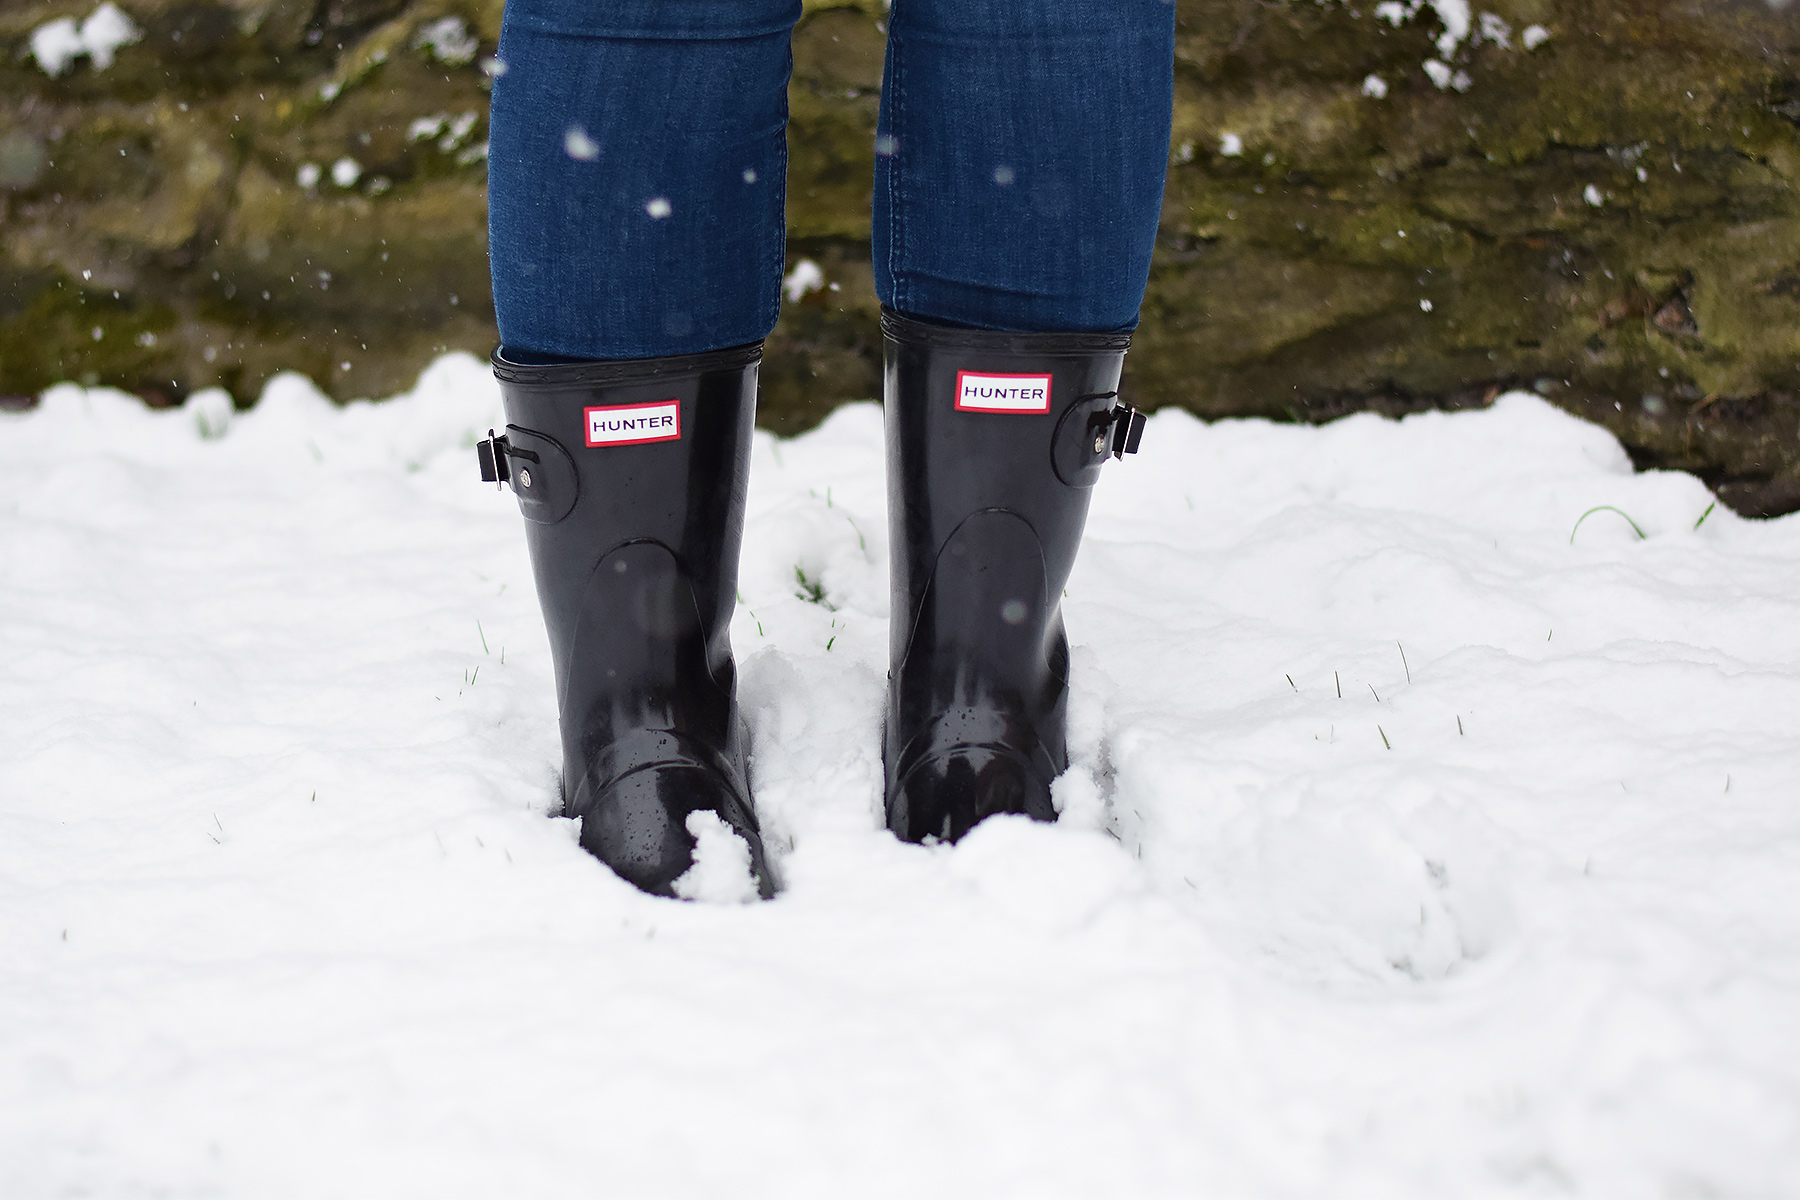 Short hunter welly boots in the snow